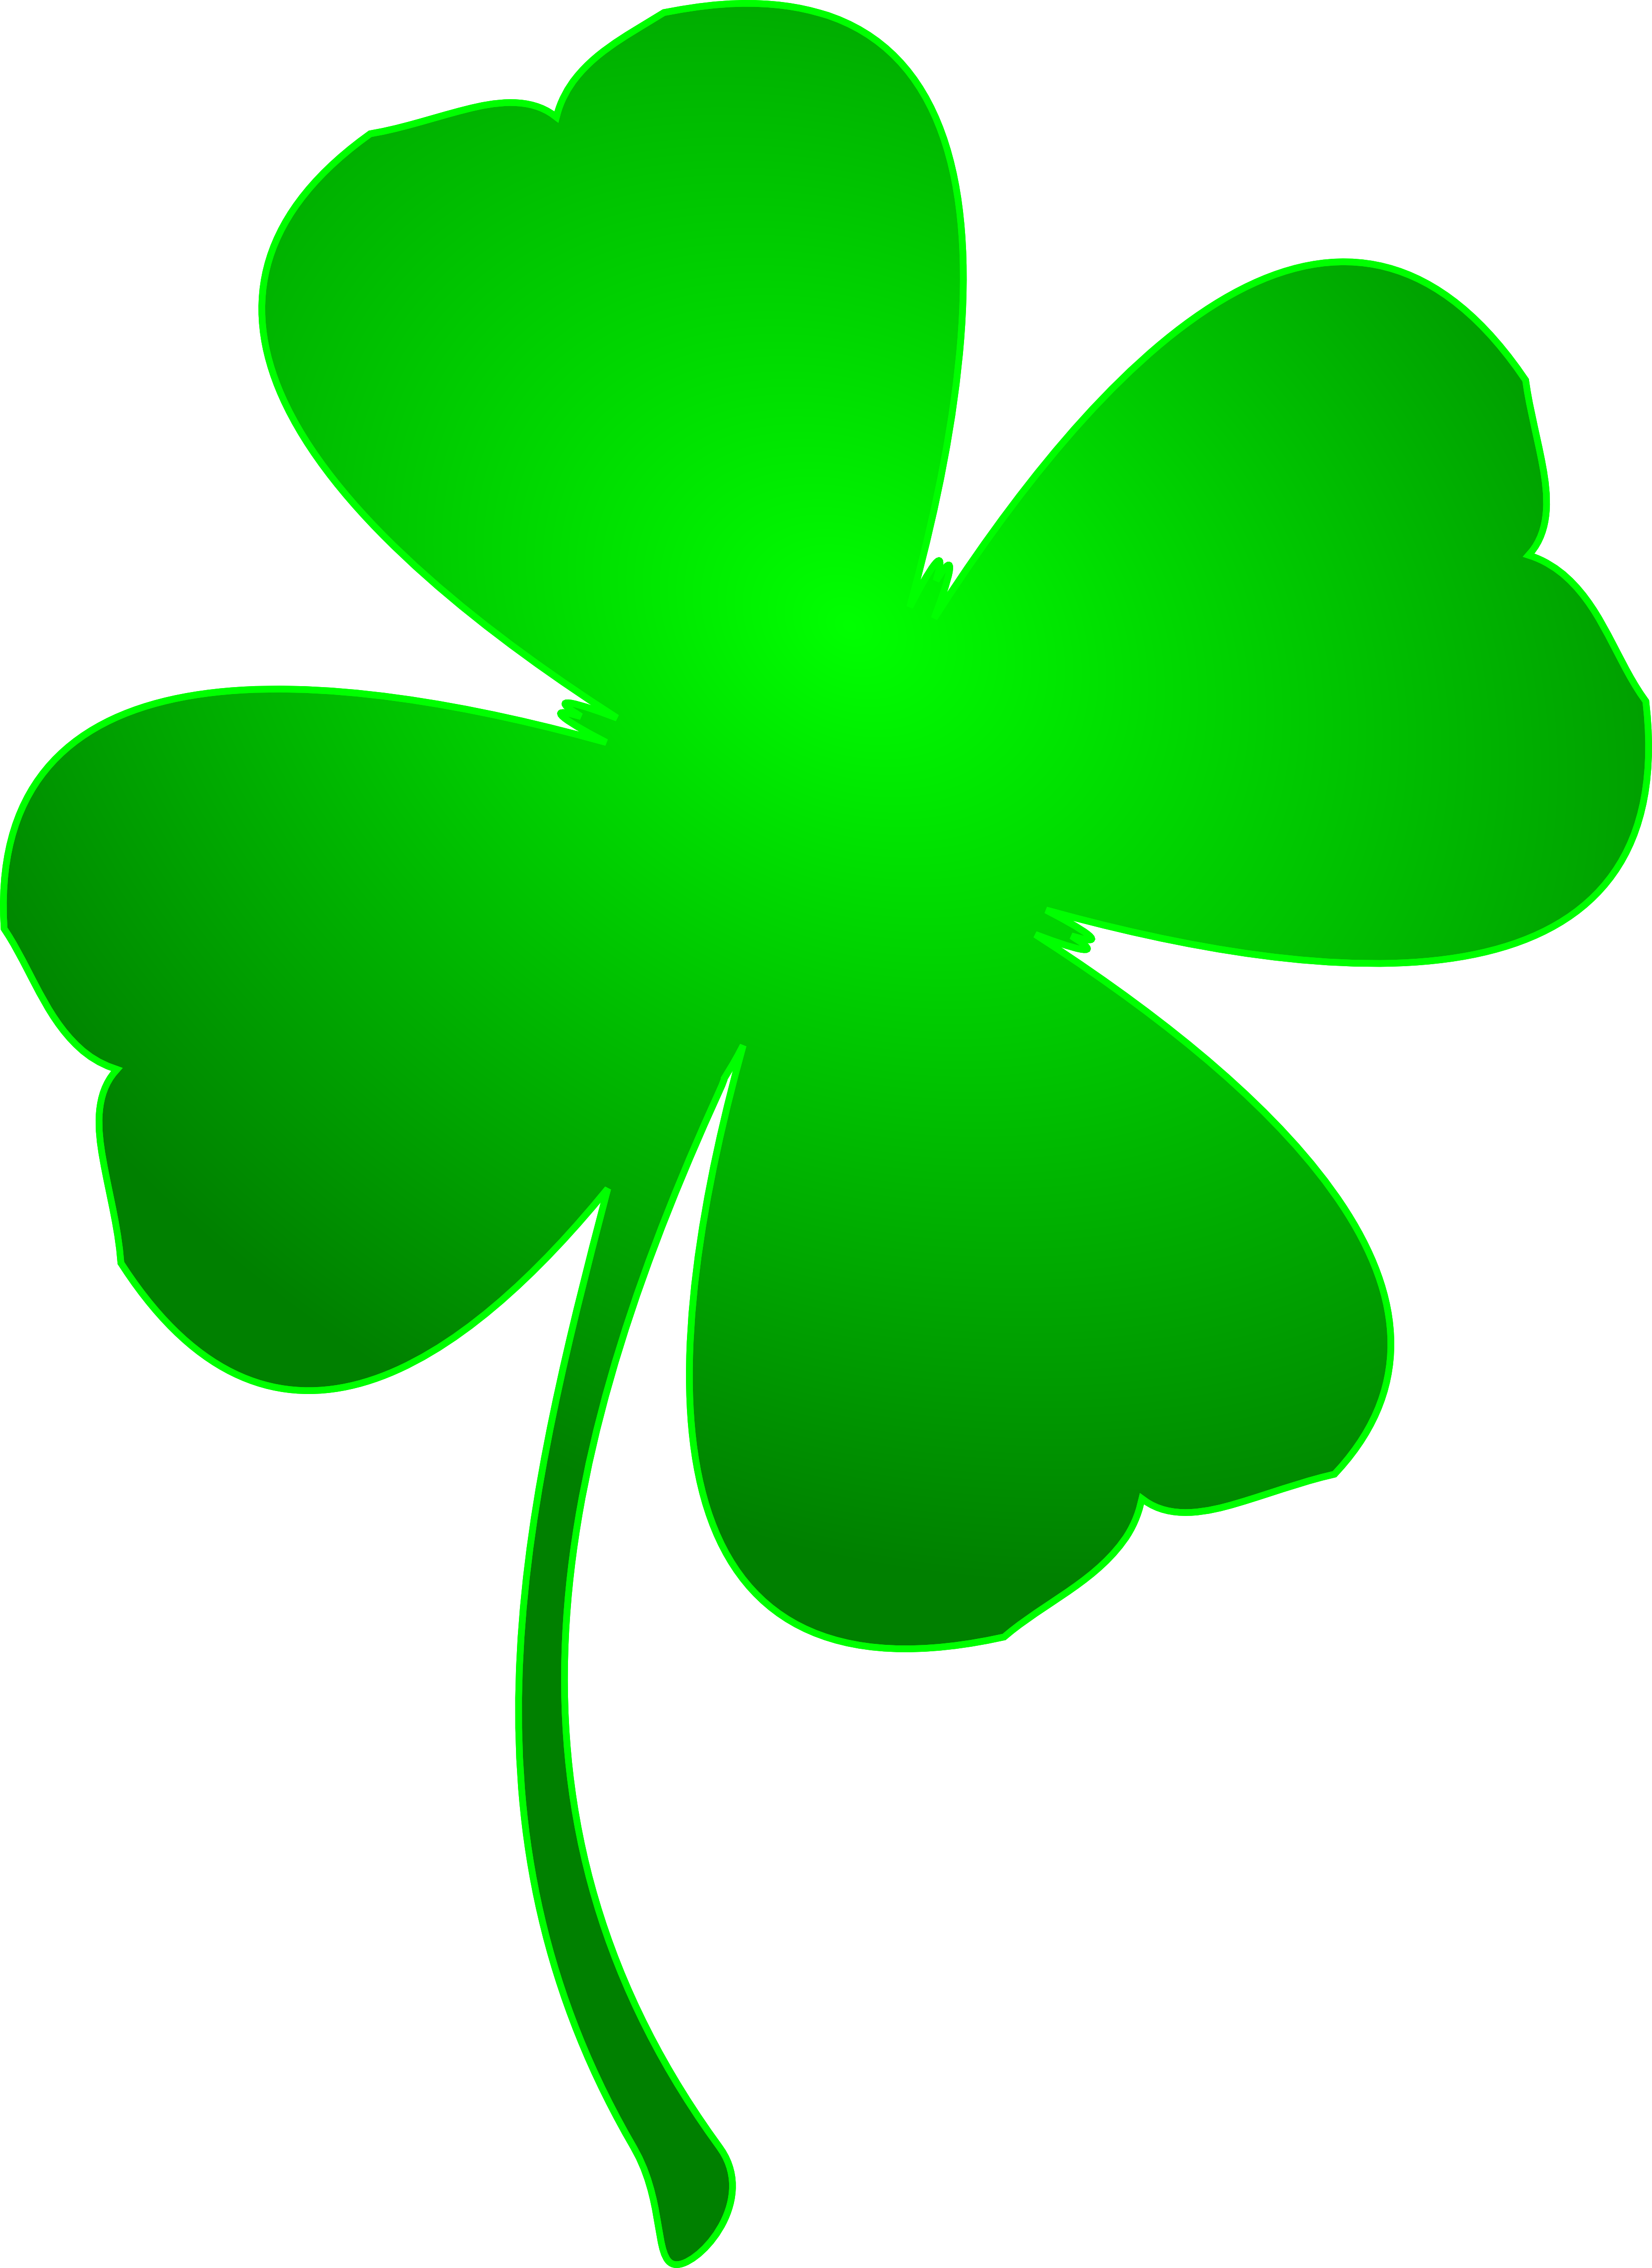 Download PNG image - Clover PNG HD 